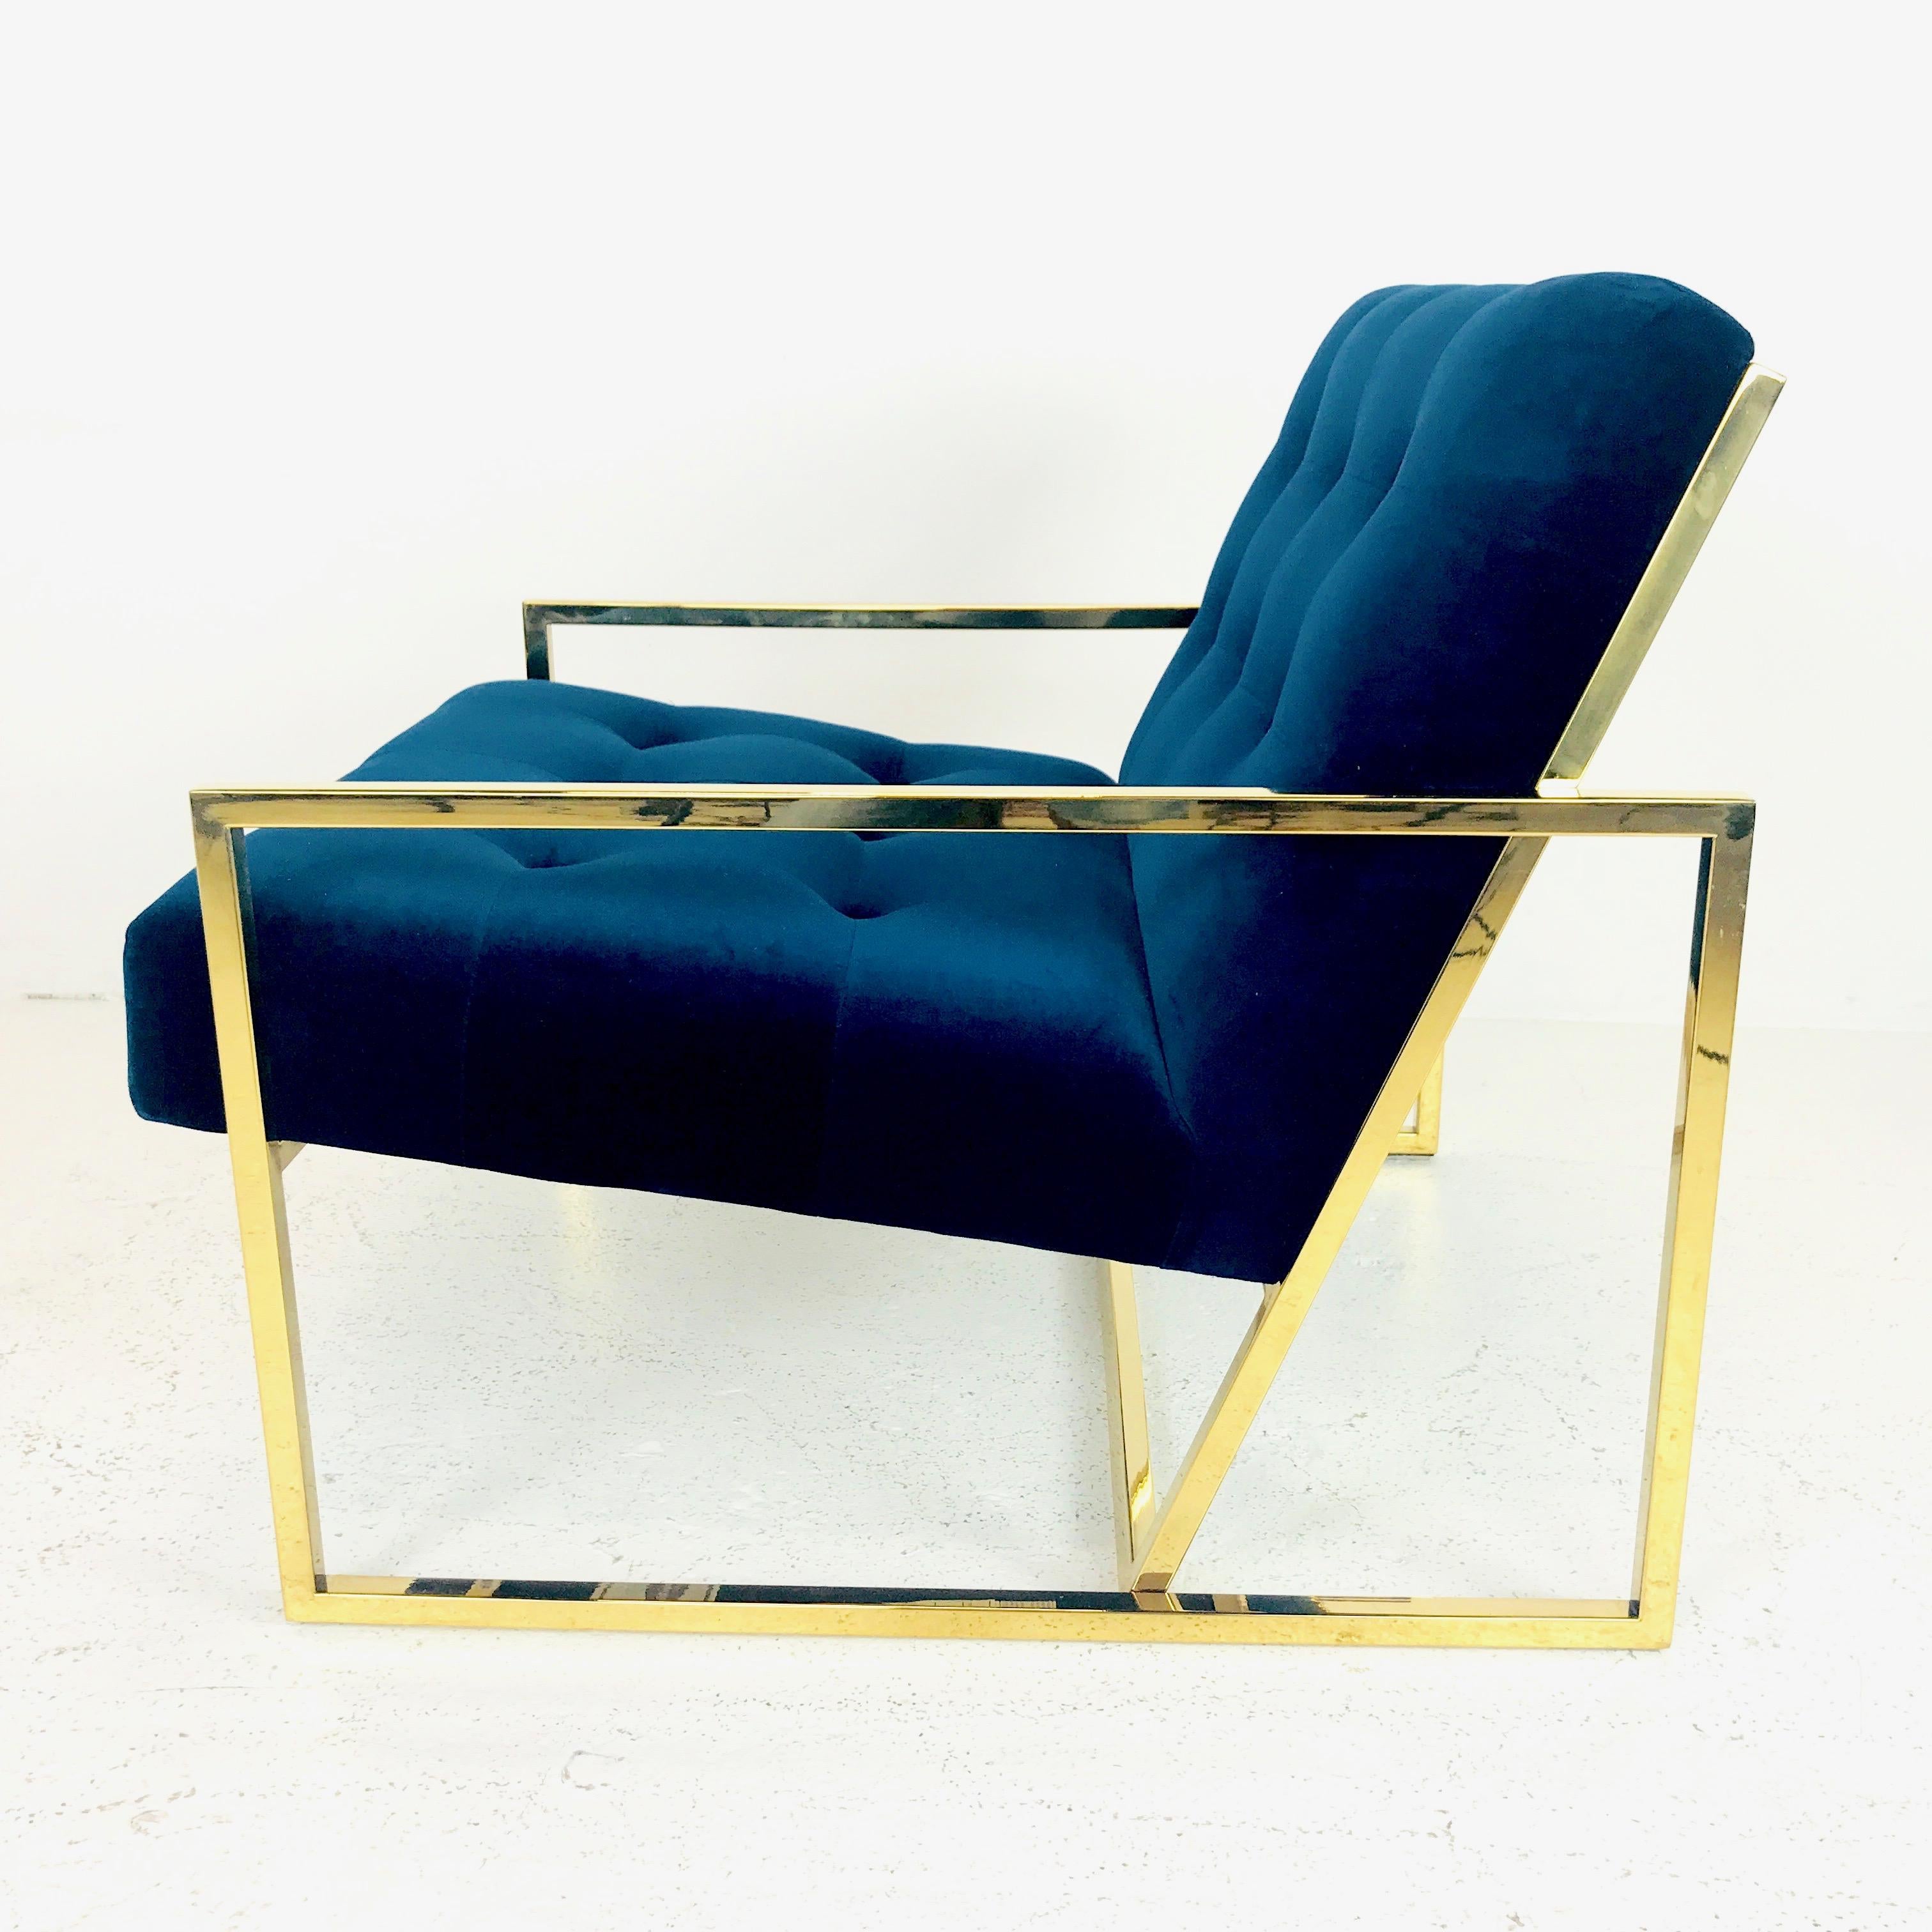 Plated Pair of Goldfinger Lounge Chairs by Jonathan Adler